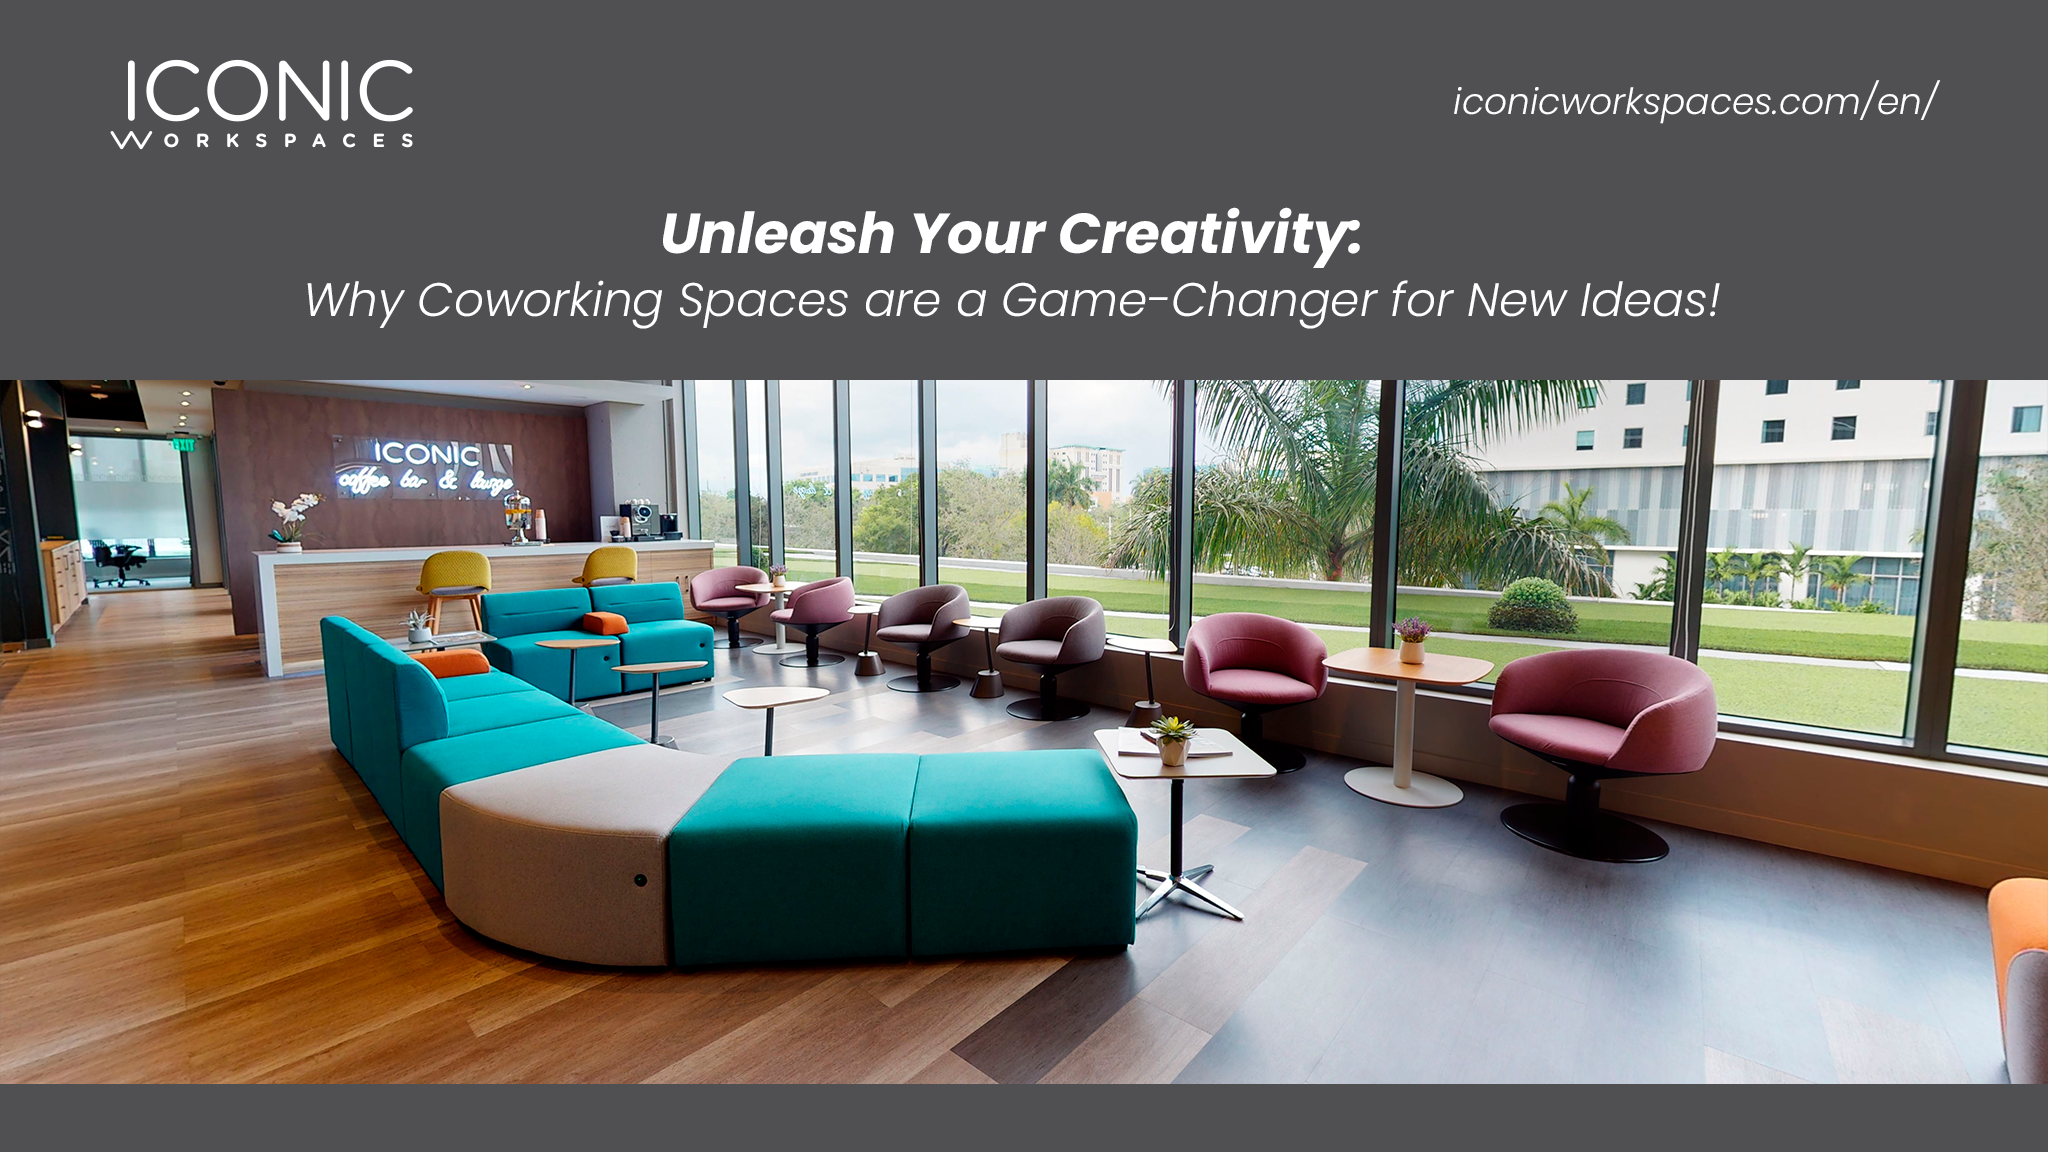 Unleash Your Creativity: Why Coworking Spaces are a Game-Changer for New Ideas!